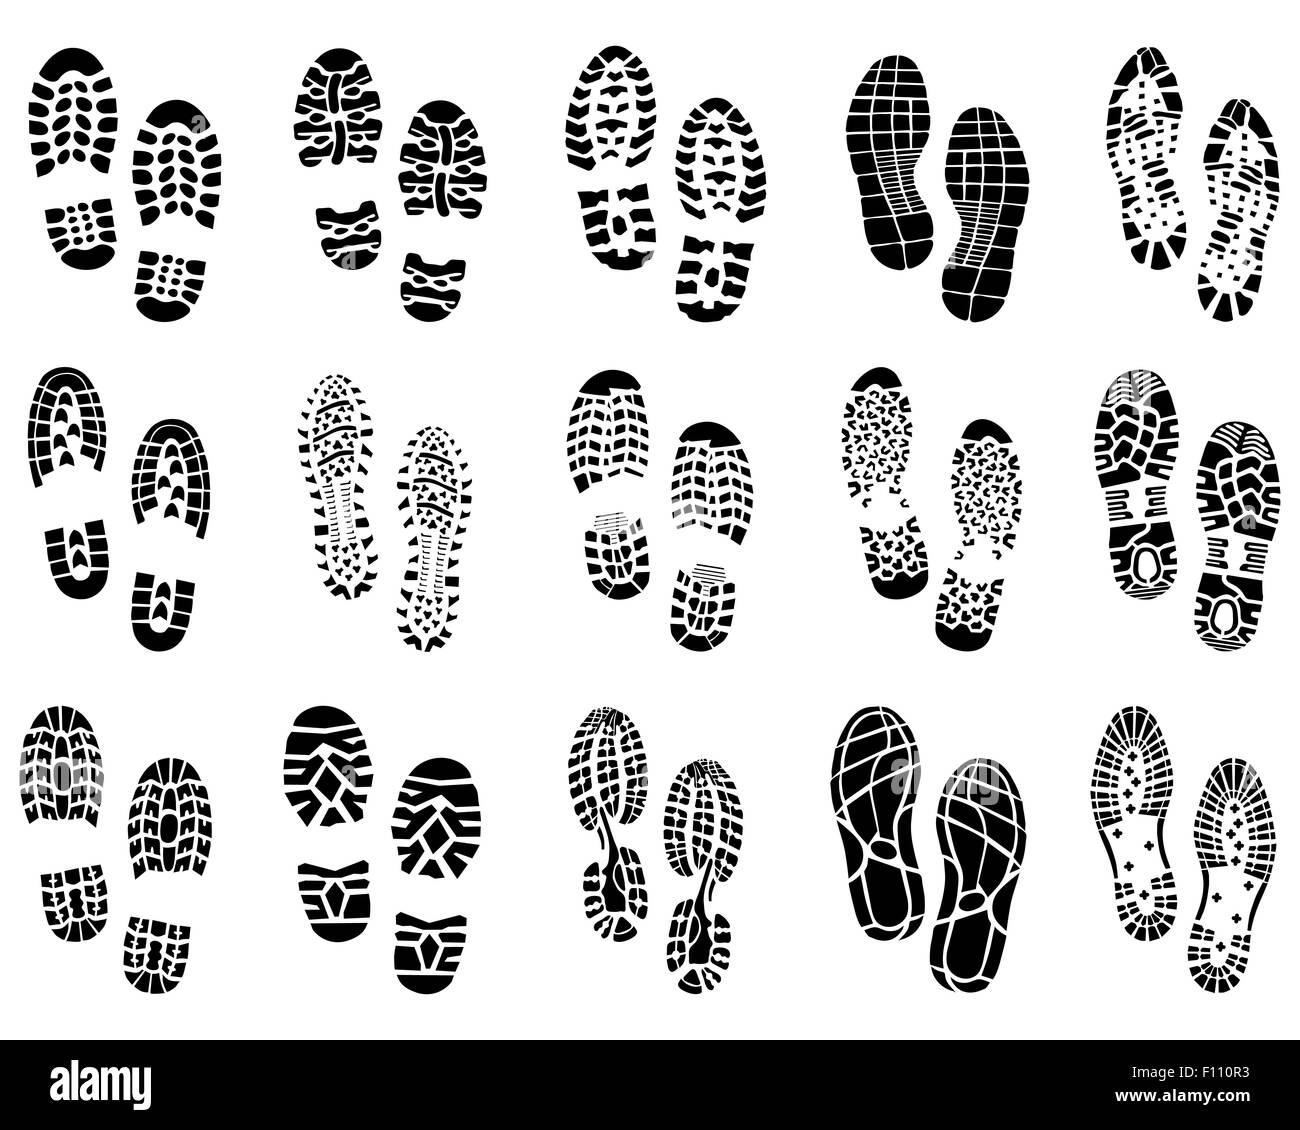 Black prints of shoes, vector Illustration Stock Photo